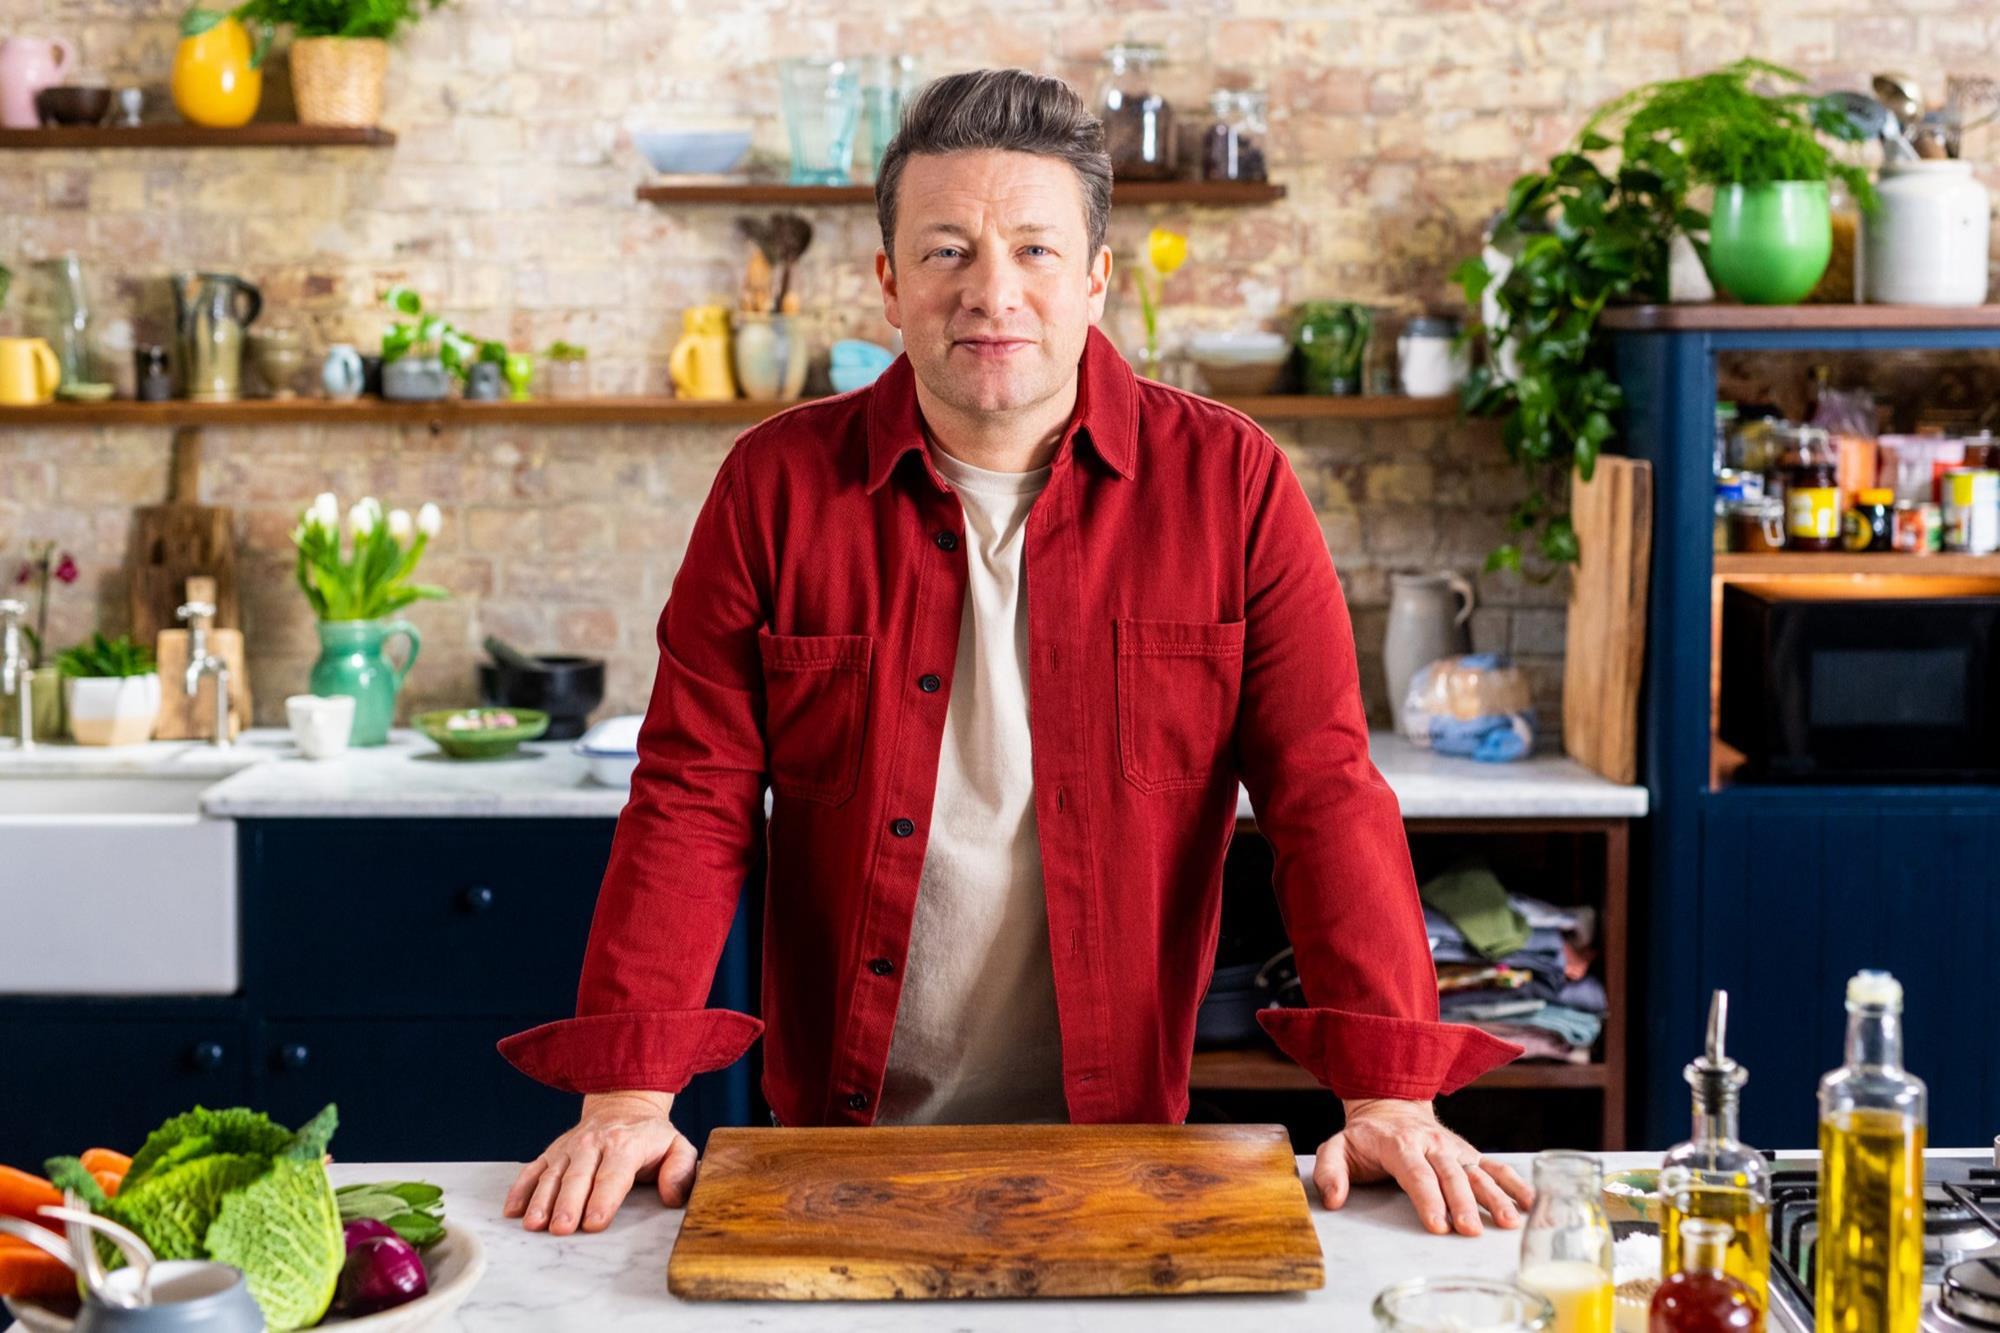 Jamie Oliver's new cooking show Together showcases recipes to